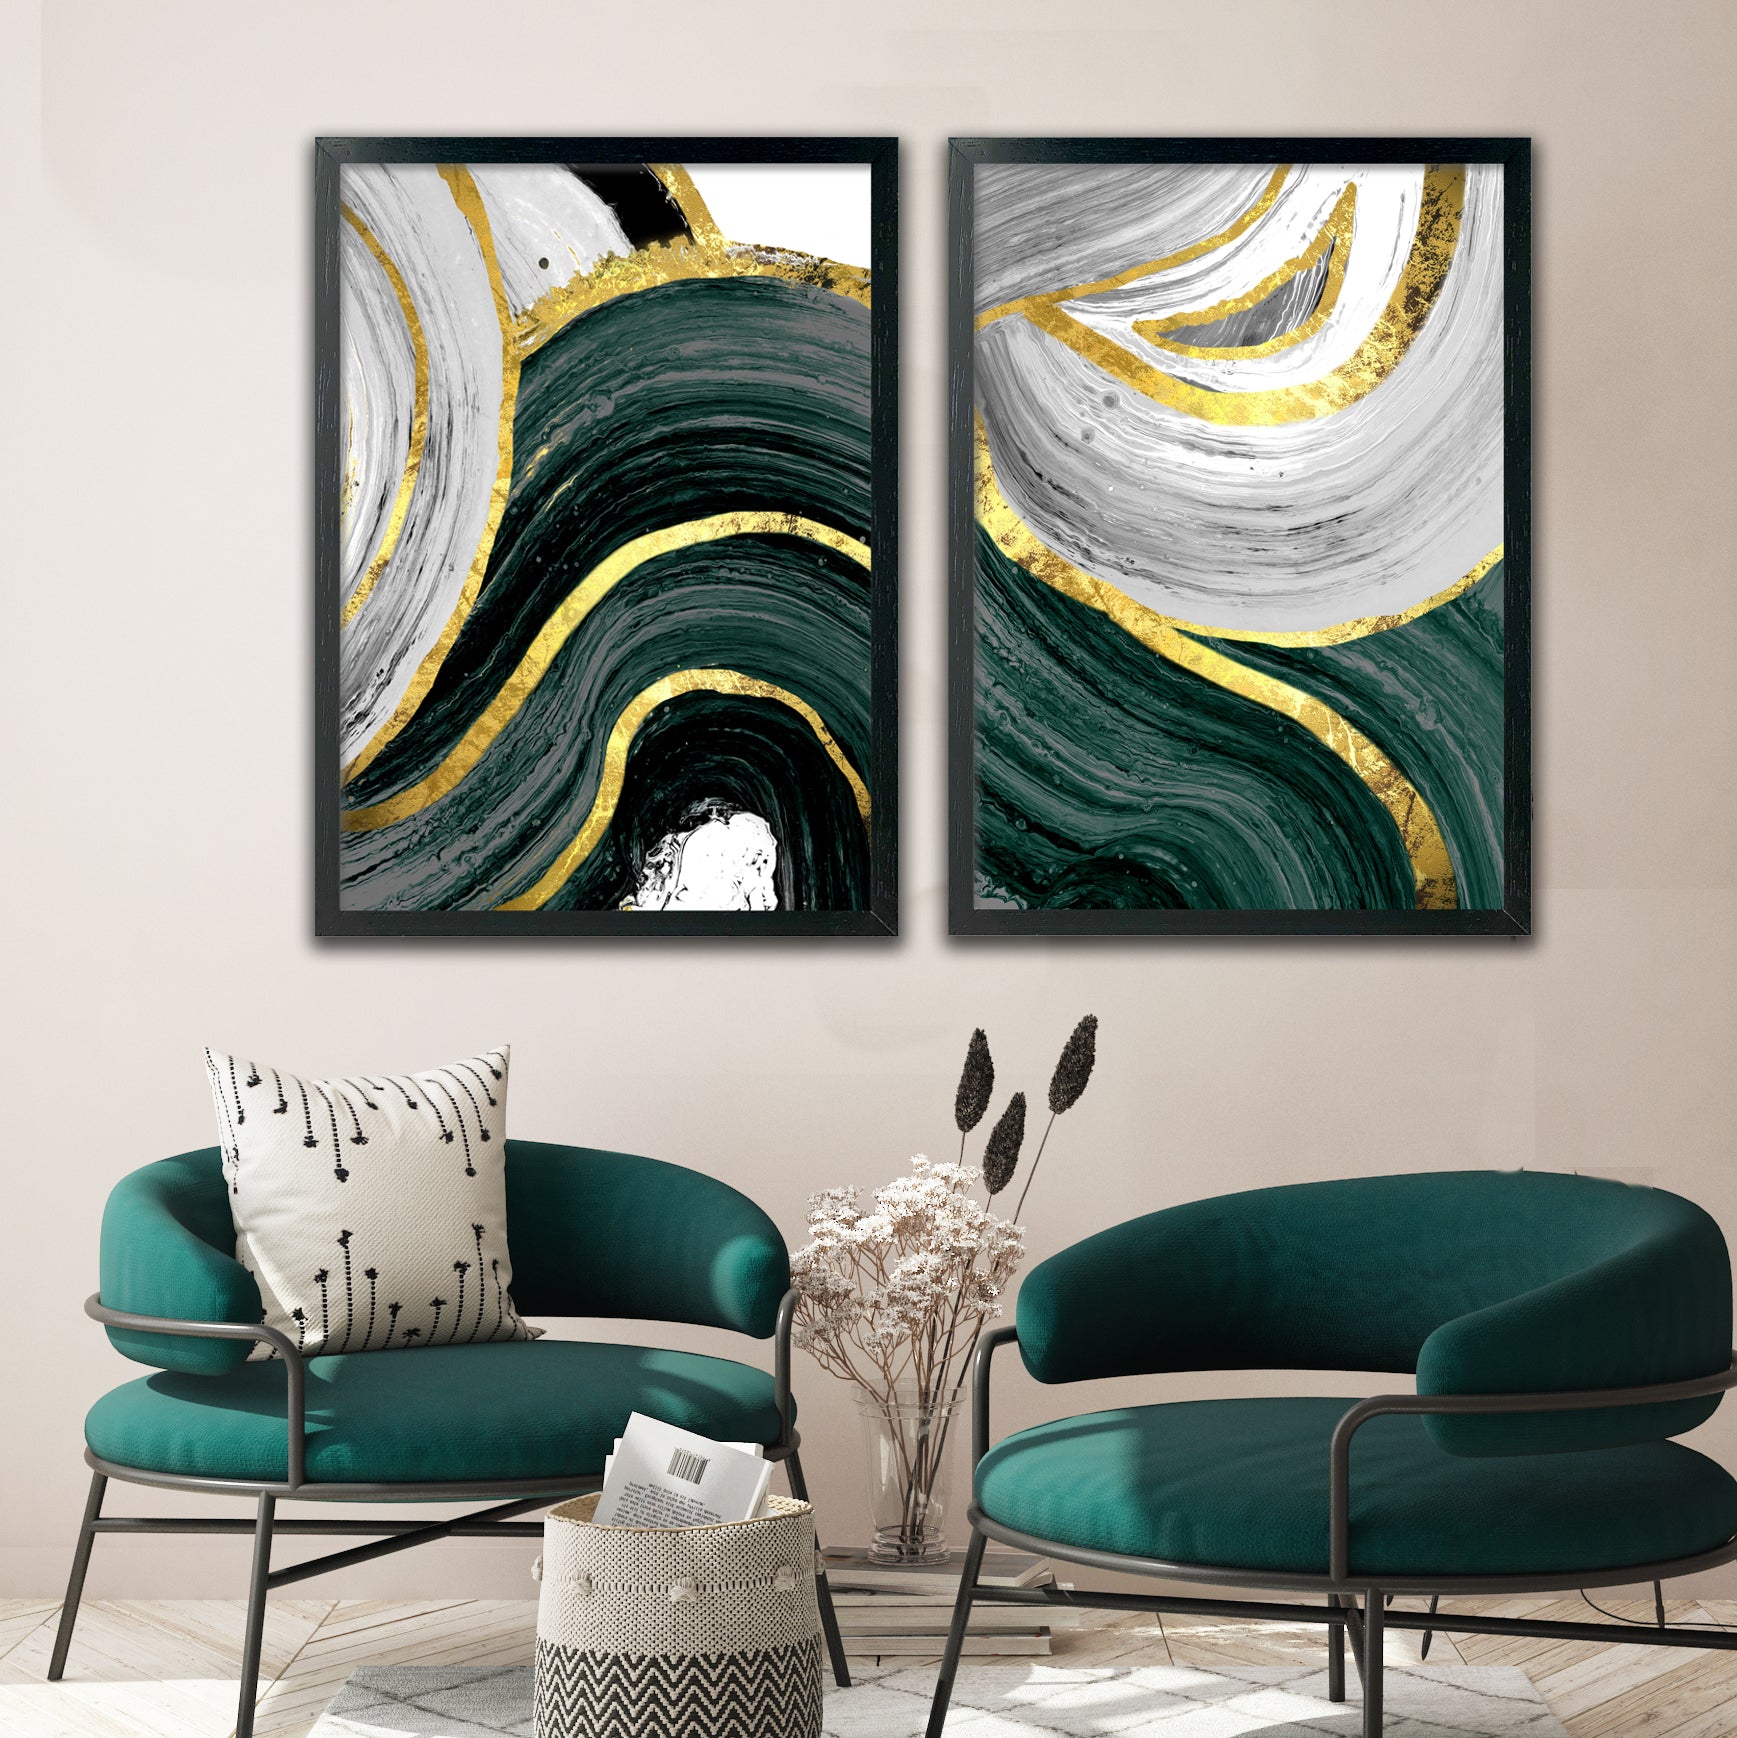 Emerald & Gold Gallery Wall